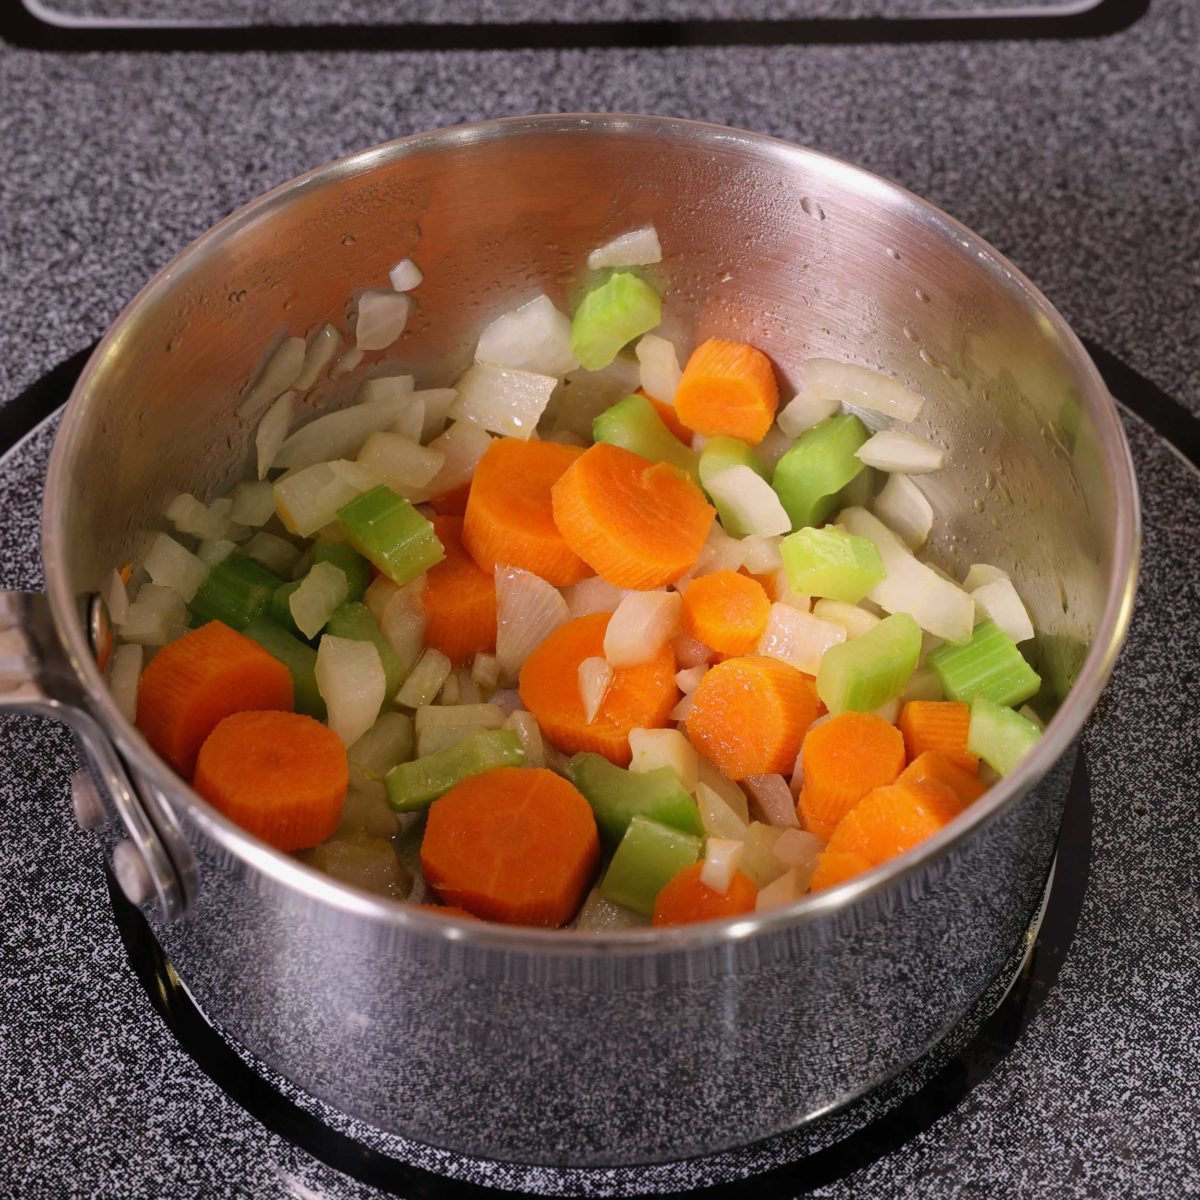 carrots, celery, onions, and garlic cooking in a small saucepan.